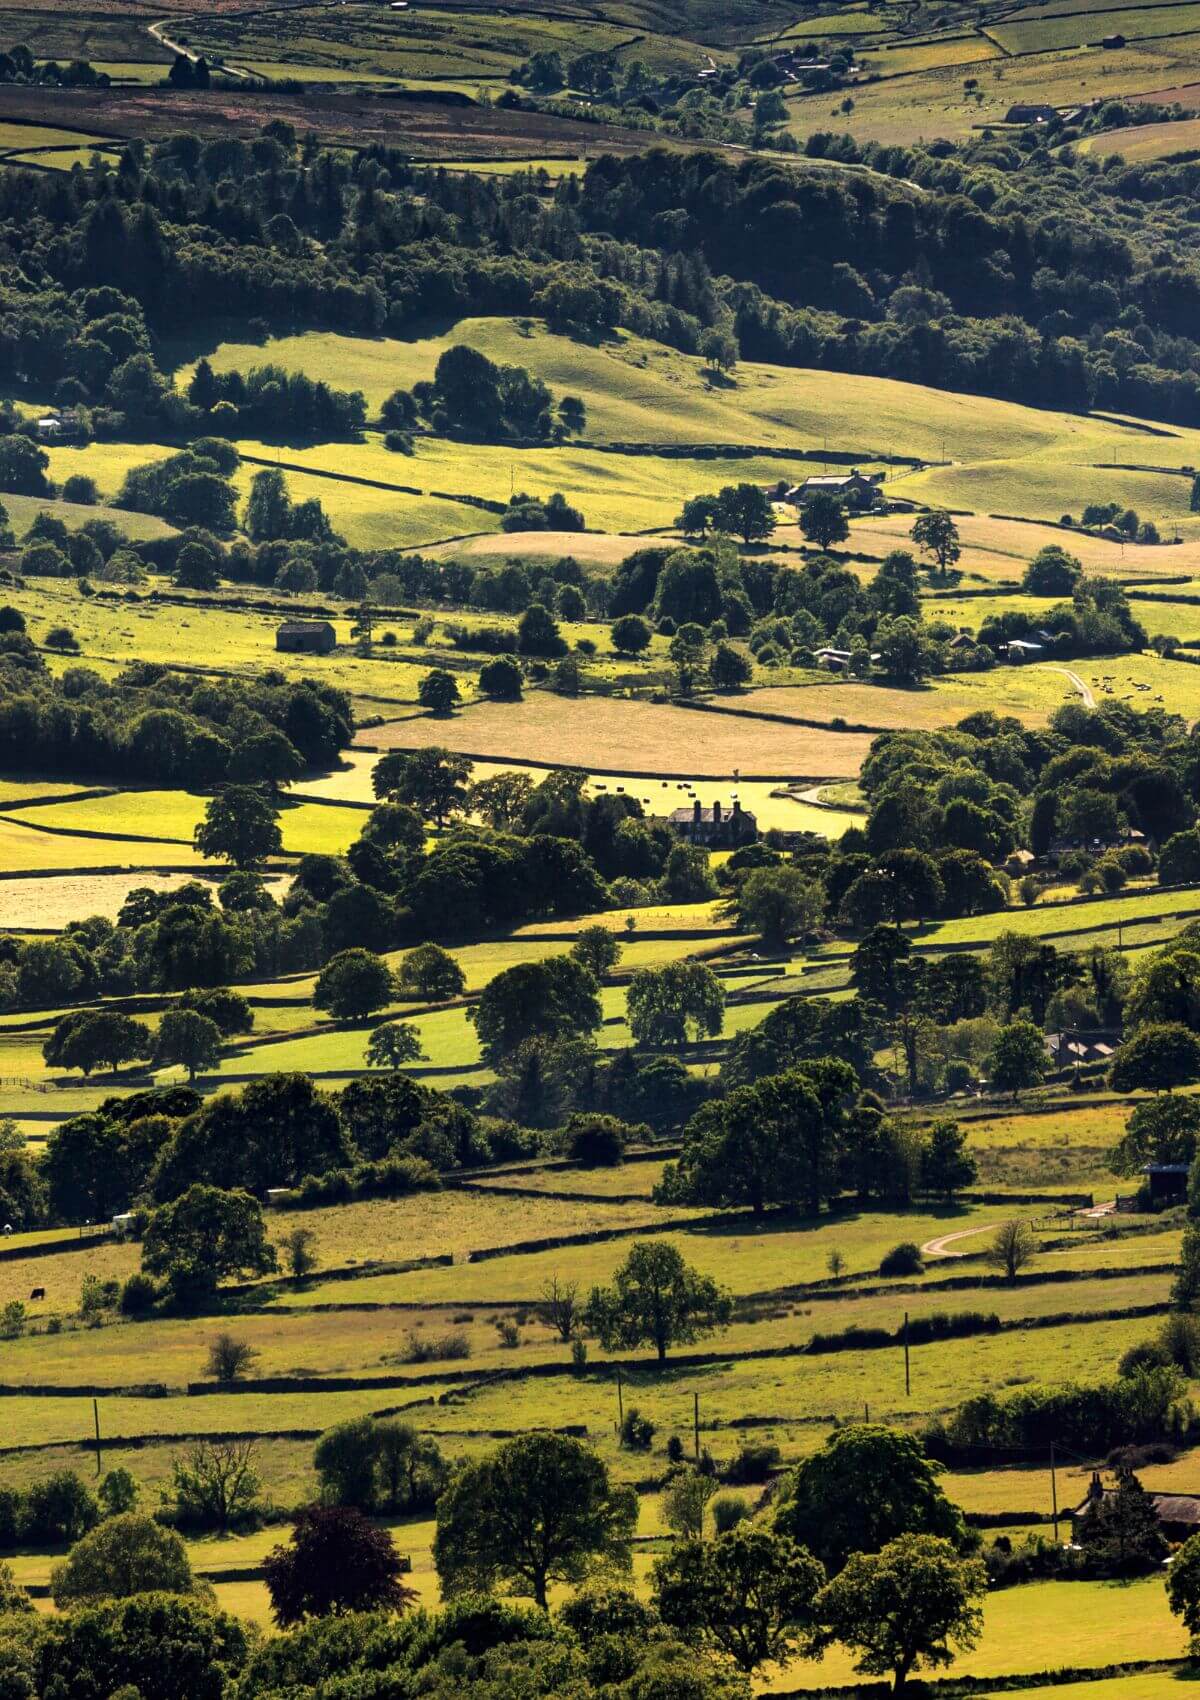 Day trip to Nidderdale from Bradford